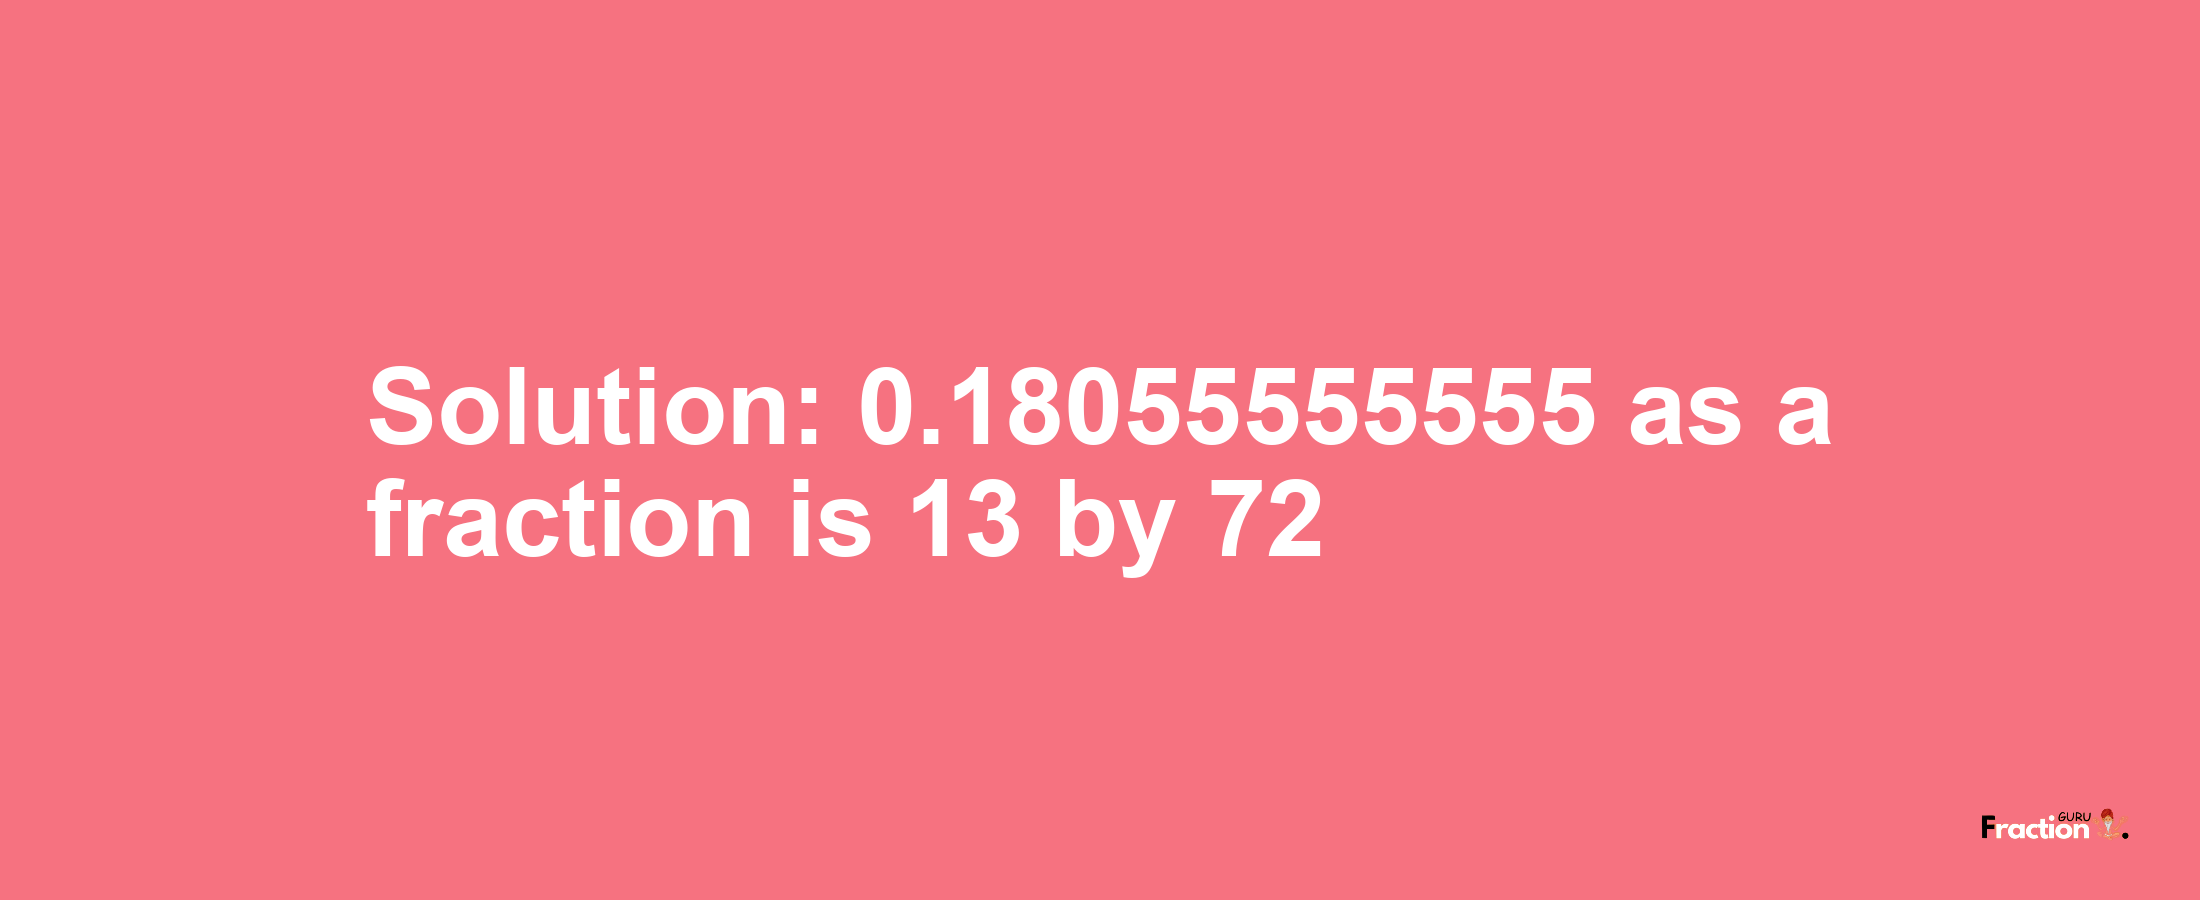 Solution:0.18055555555 as a fraction is 13/72